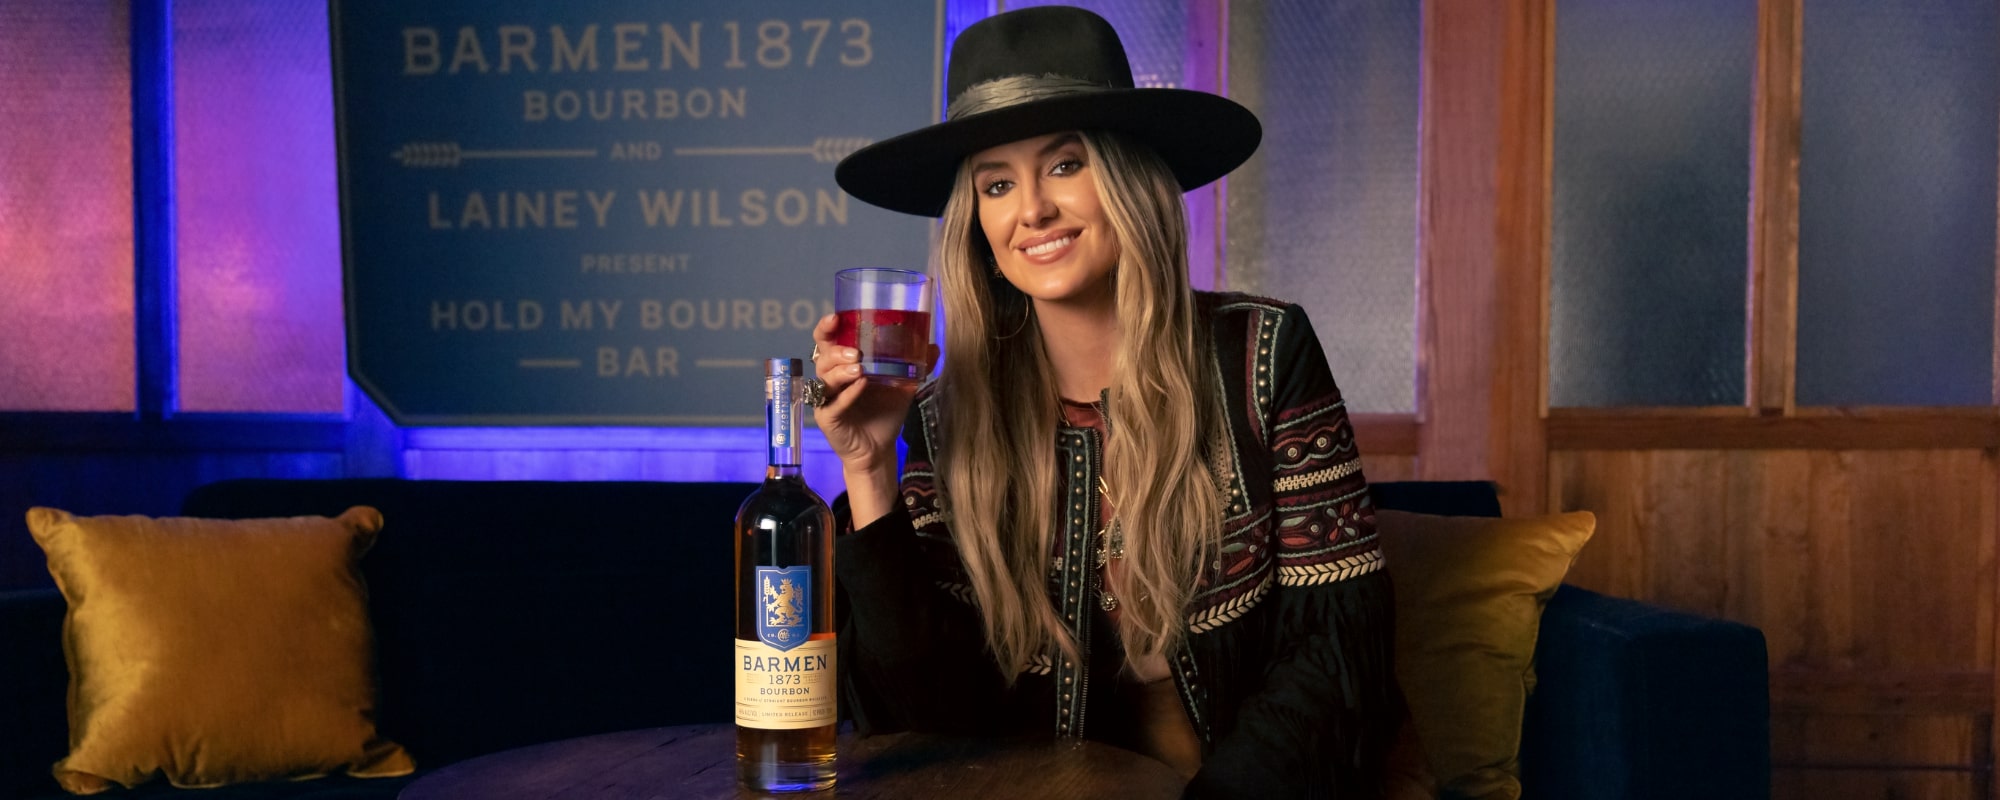 Lainey Wilson to Partner with Barmen 1873 Bourbon to Open Pop-Up Bar in Nashville